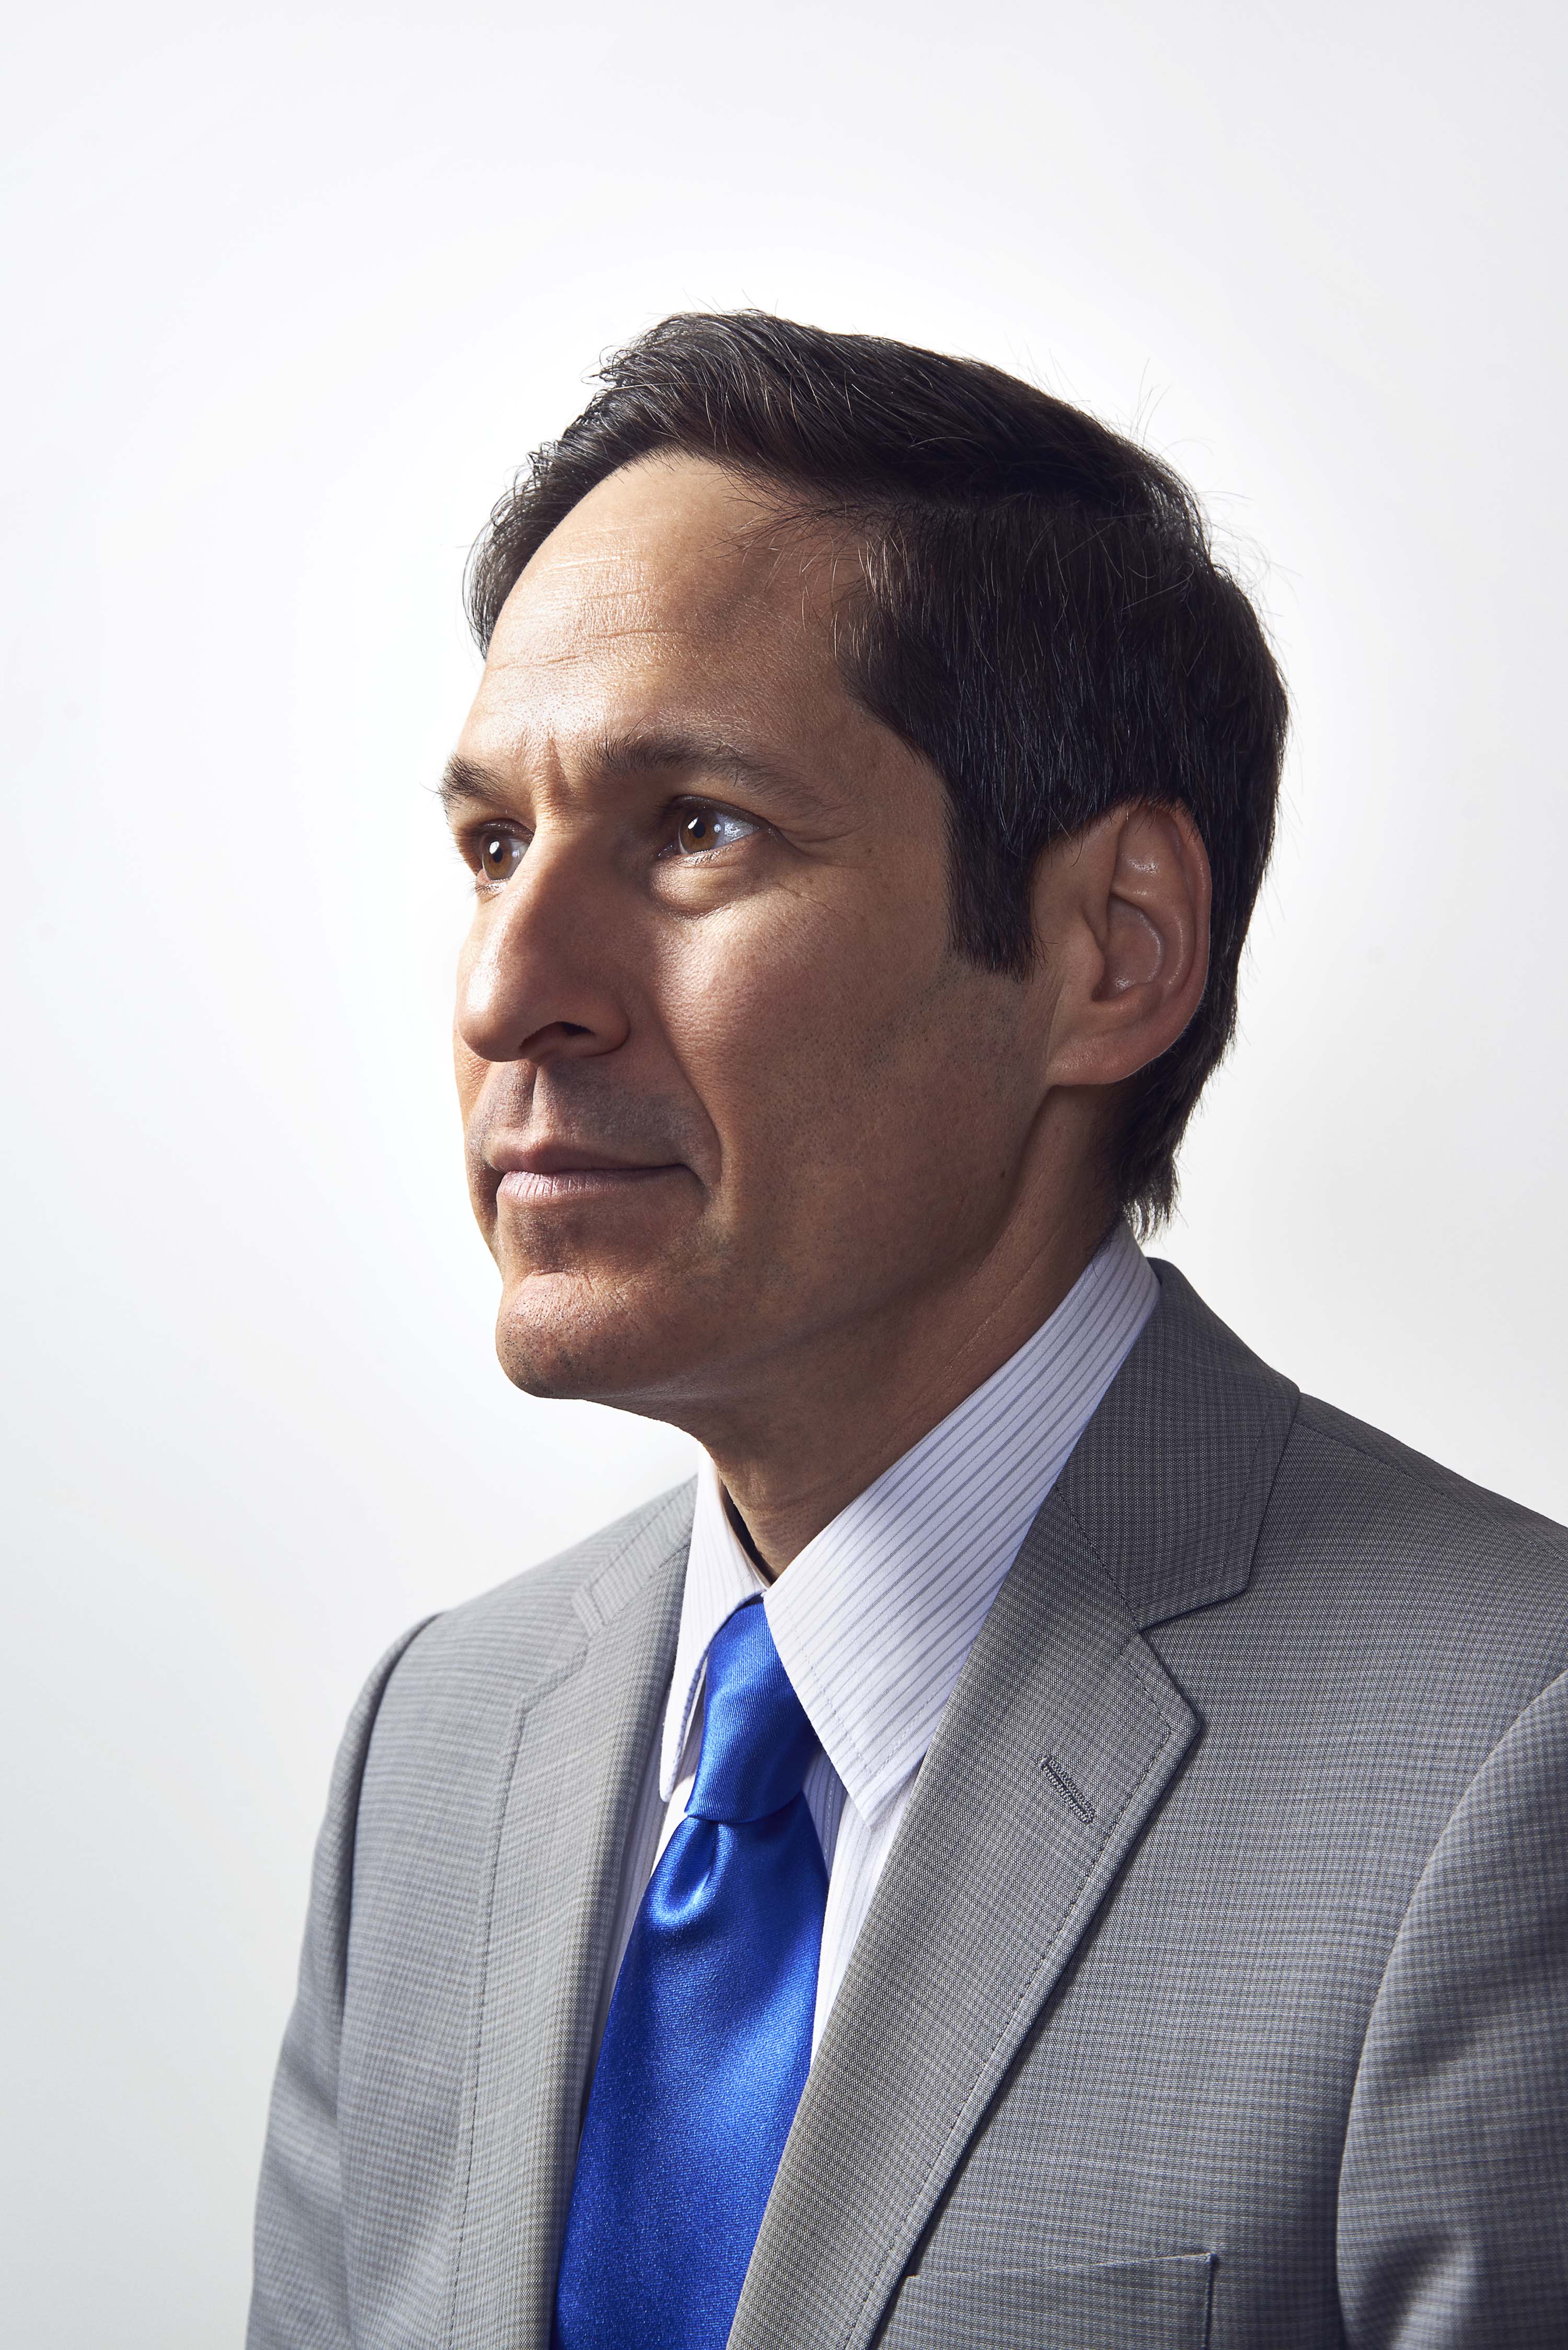 Dr. Tom Frieden, CDC Director, has been in the hot seat since Ebola hit the U.S.